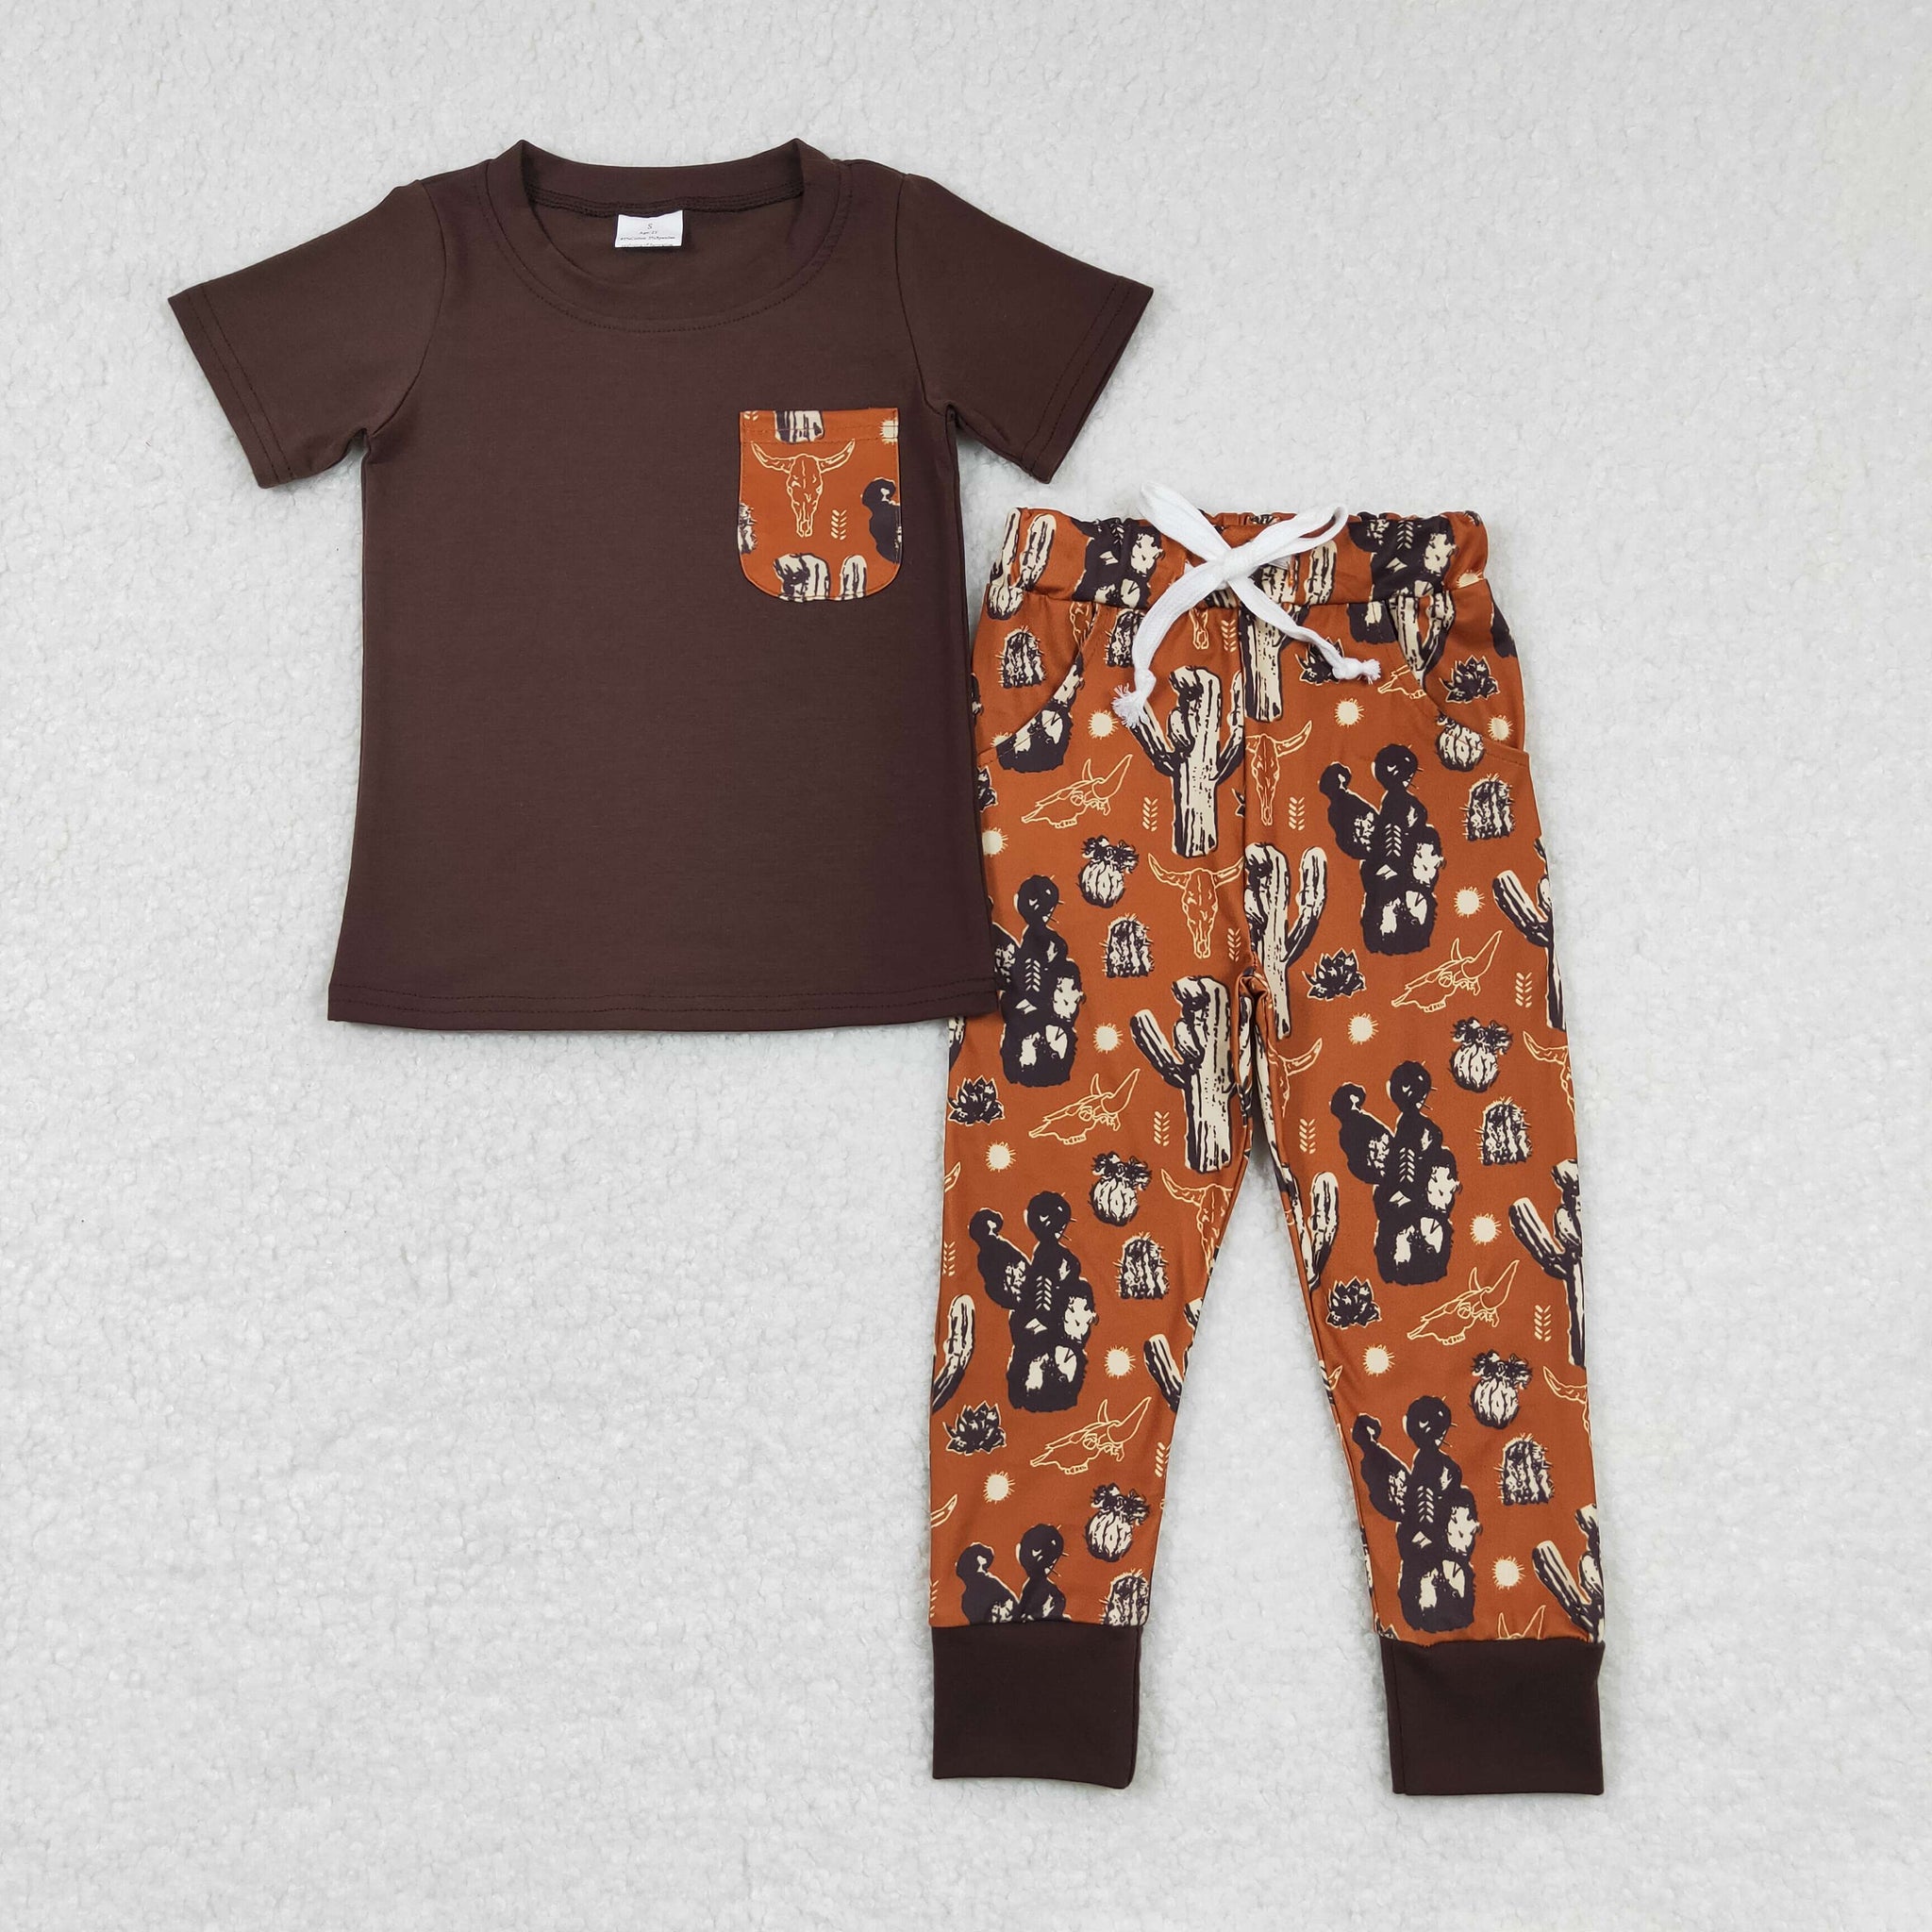 BSPO0165 baby boy clothes boy western outfit brown fall spring outfits